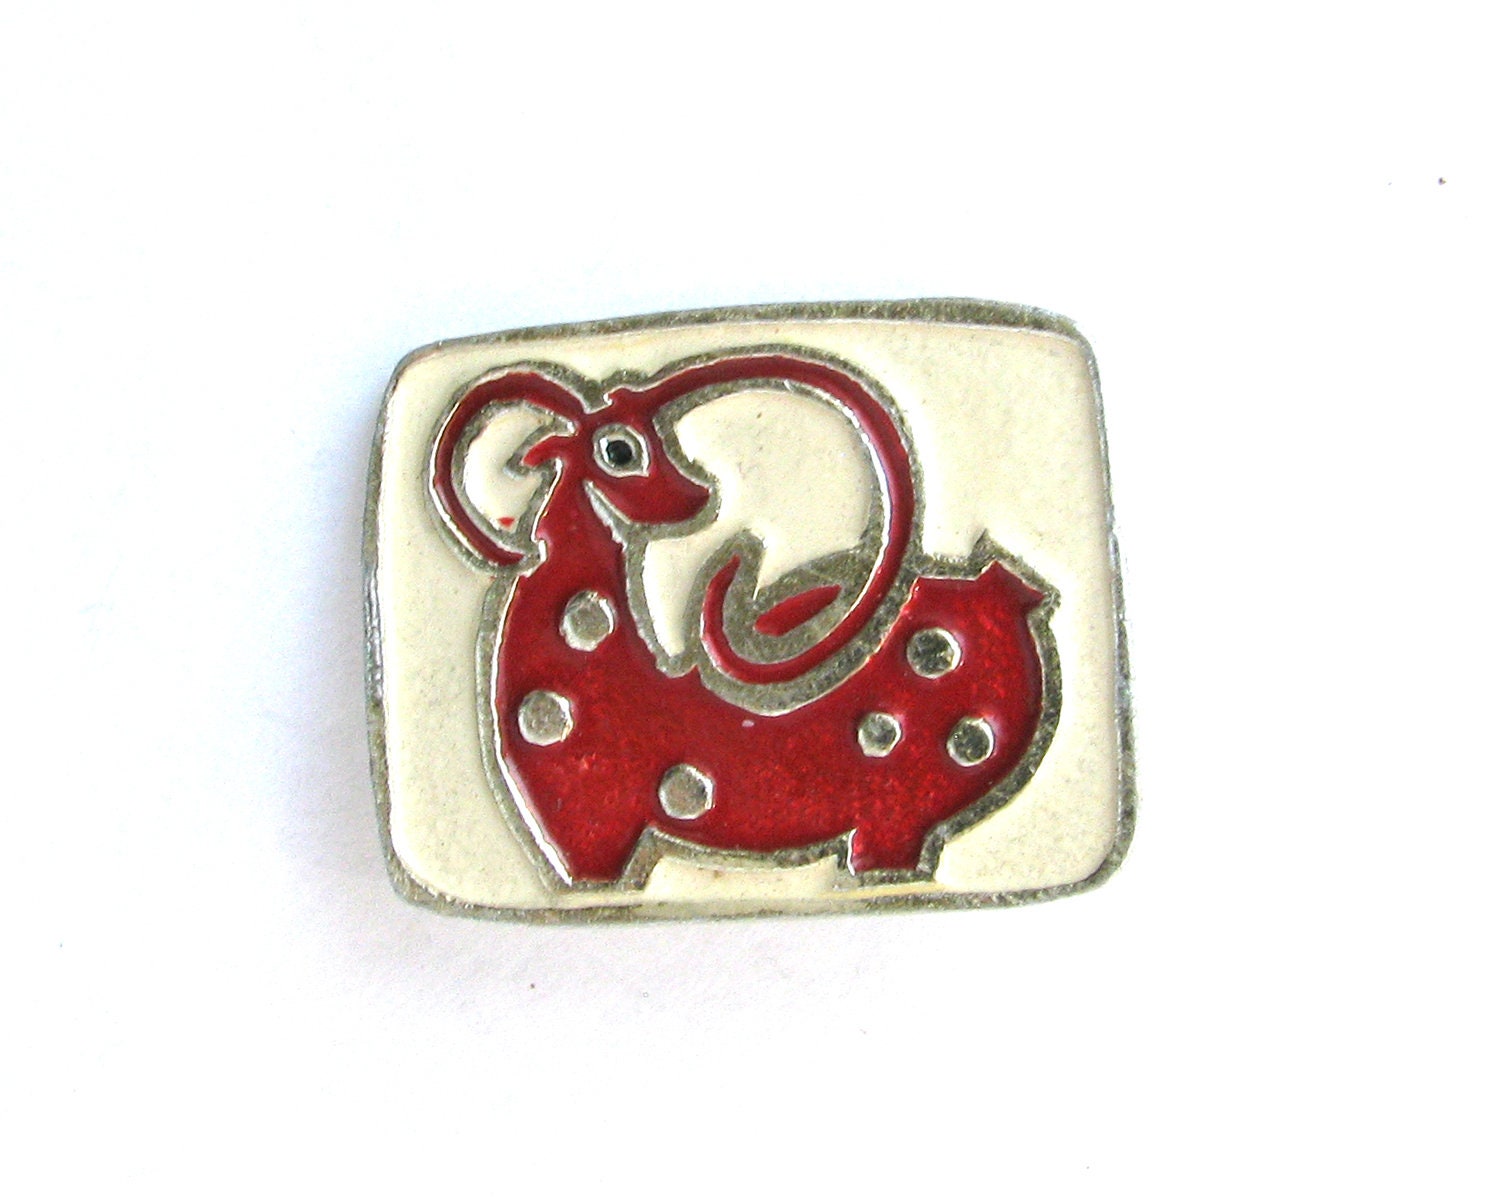 Ram, Russian Toy, Soviet Badge, Vintage Collectible Pin, Ussr, 1980S